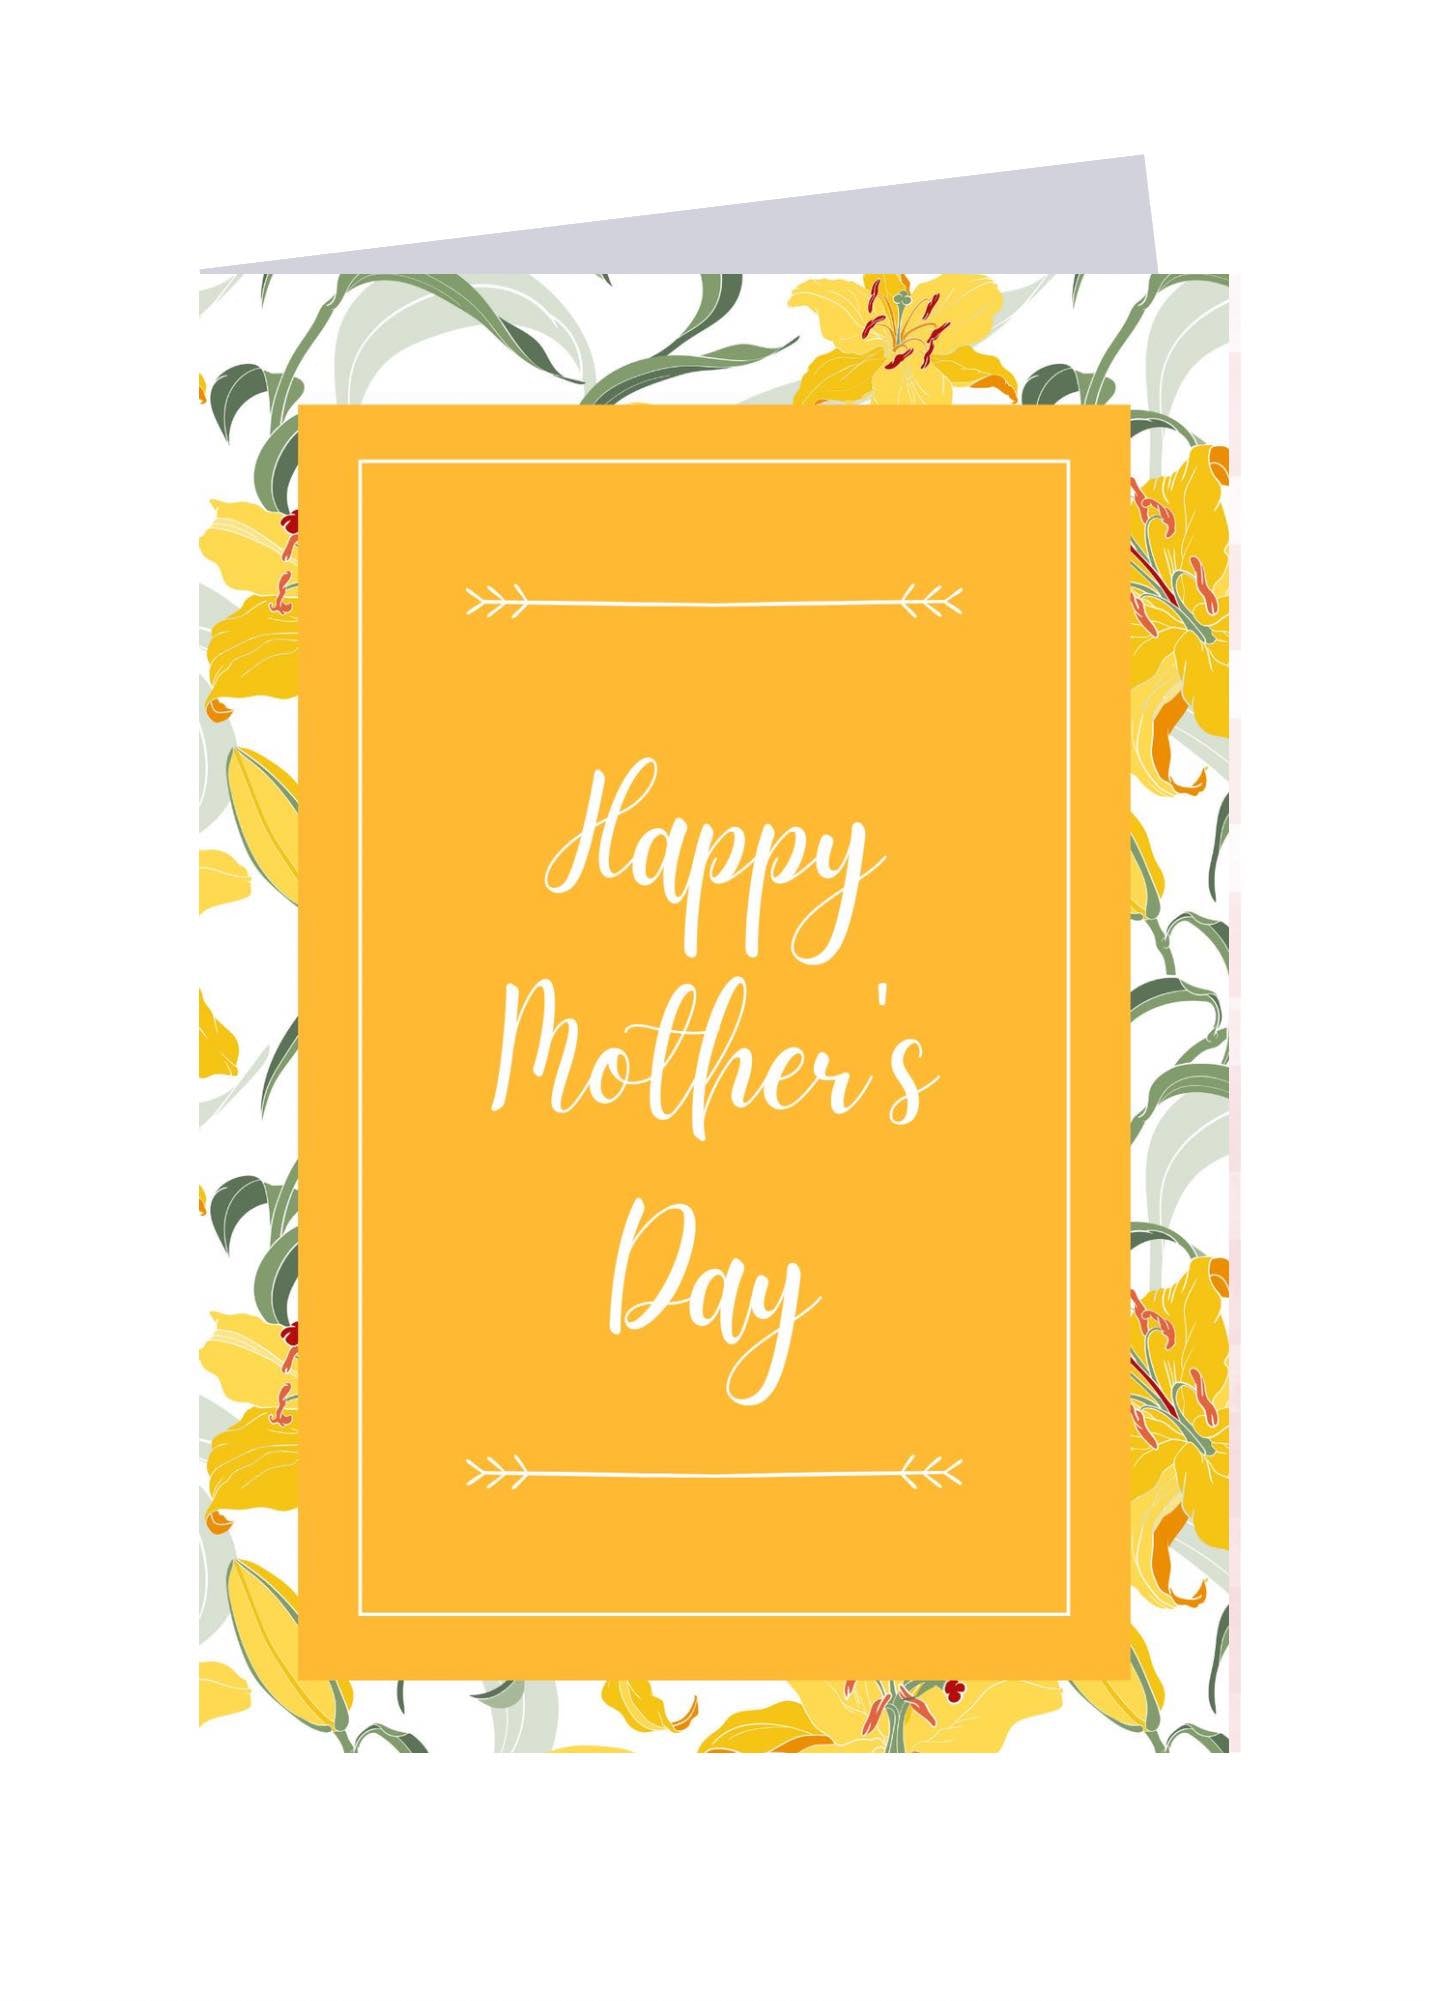 Happy Mother's Day (Yellow) - Sweet Card